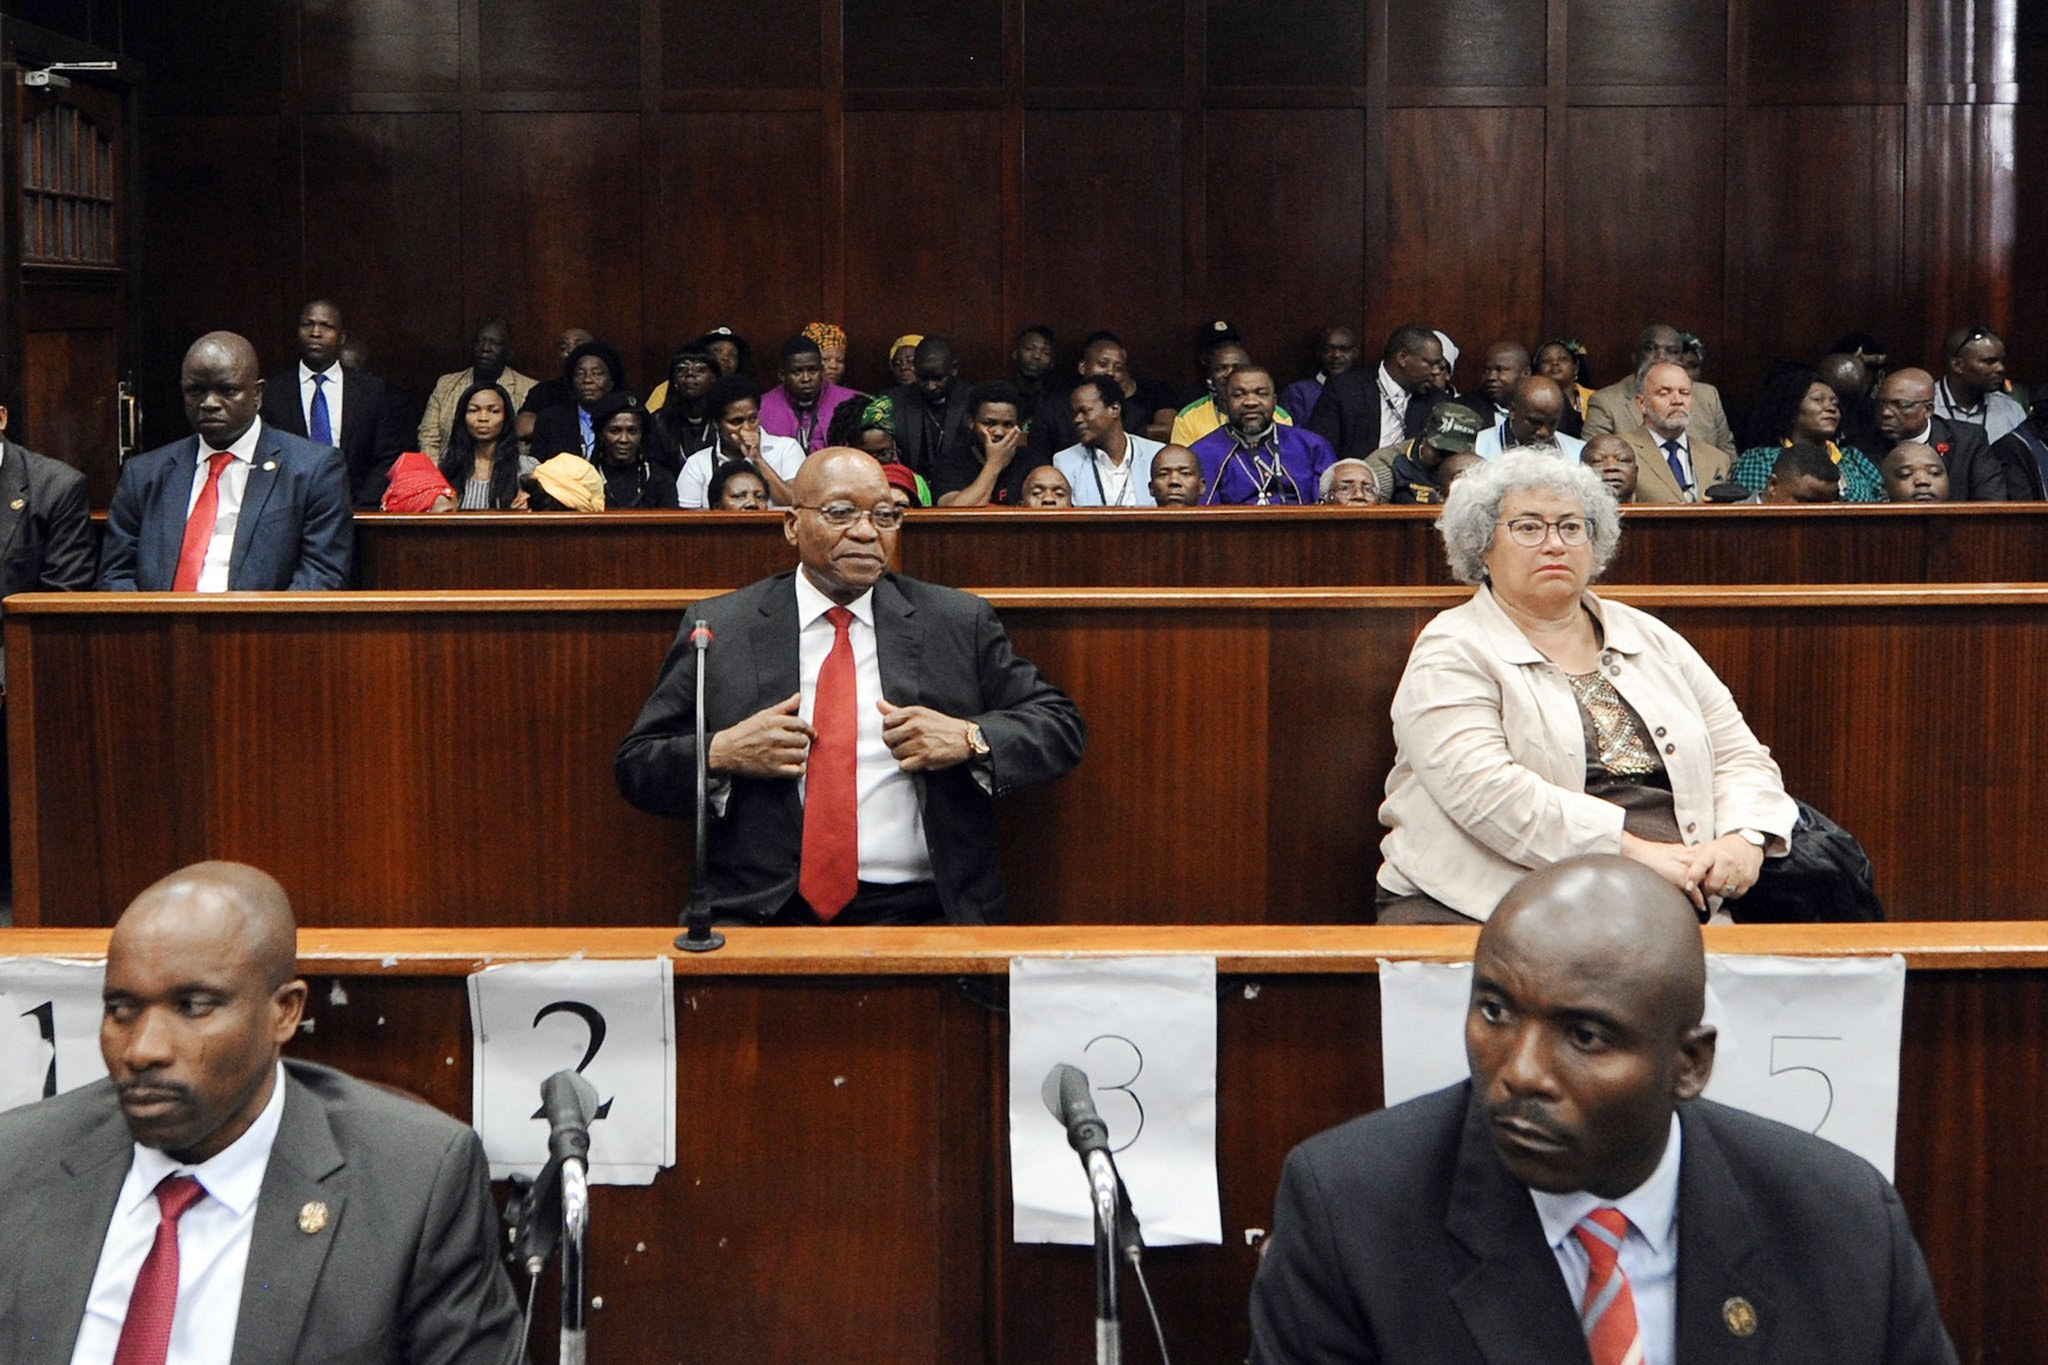 Jacob Zuma, center, the former president of South Africa, appeared in court in Durban this month for a hearing on corruption charges. Credit Felix Dlangamandla/Agence France-Presse — Getty Images 